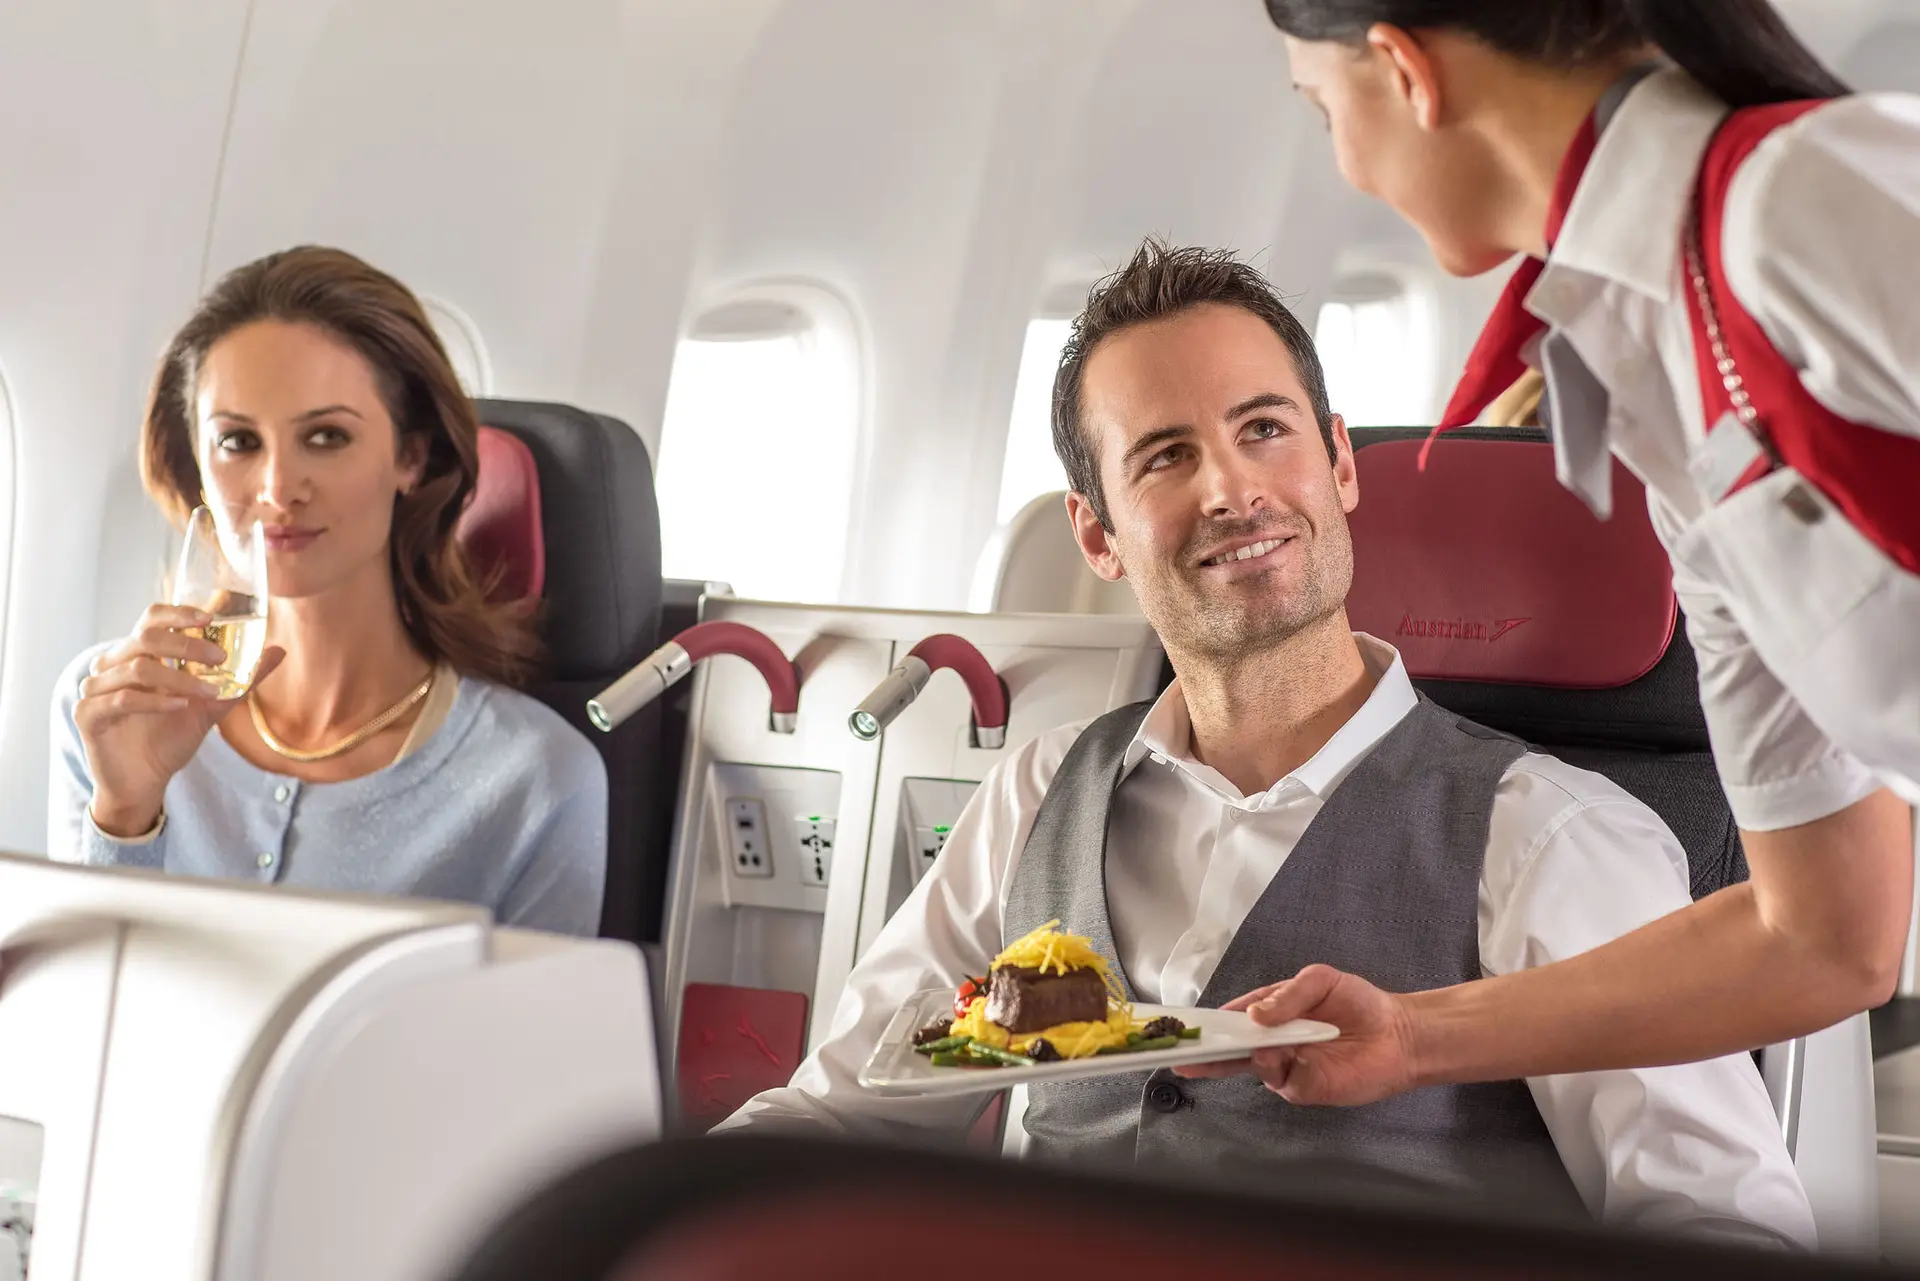 Airline review Cuisine - Austrian Airlines - 2